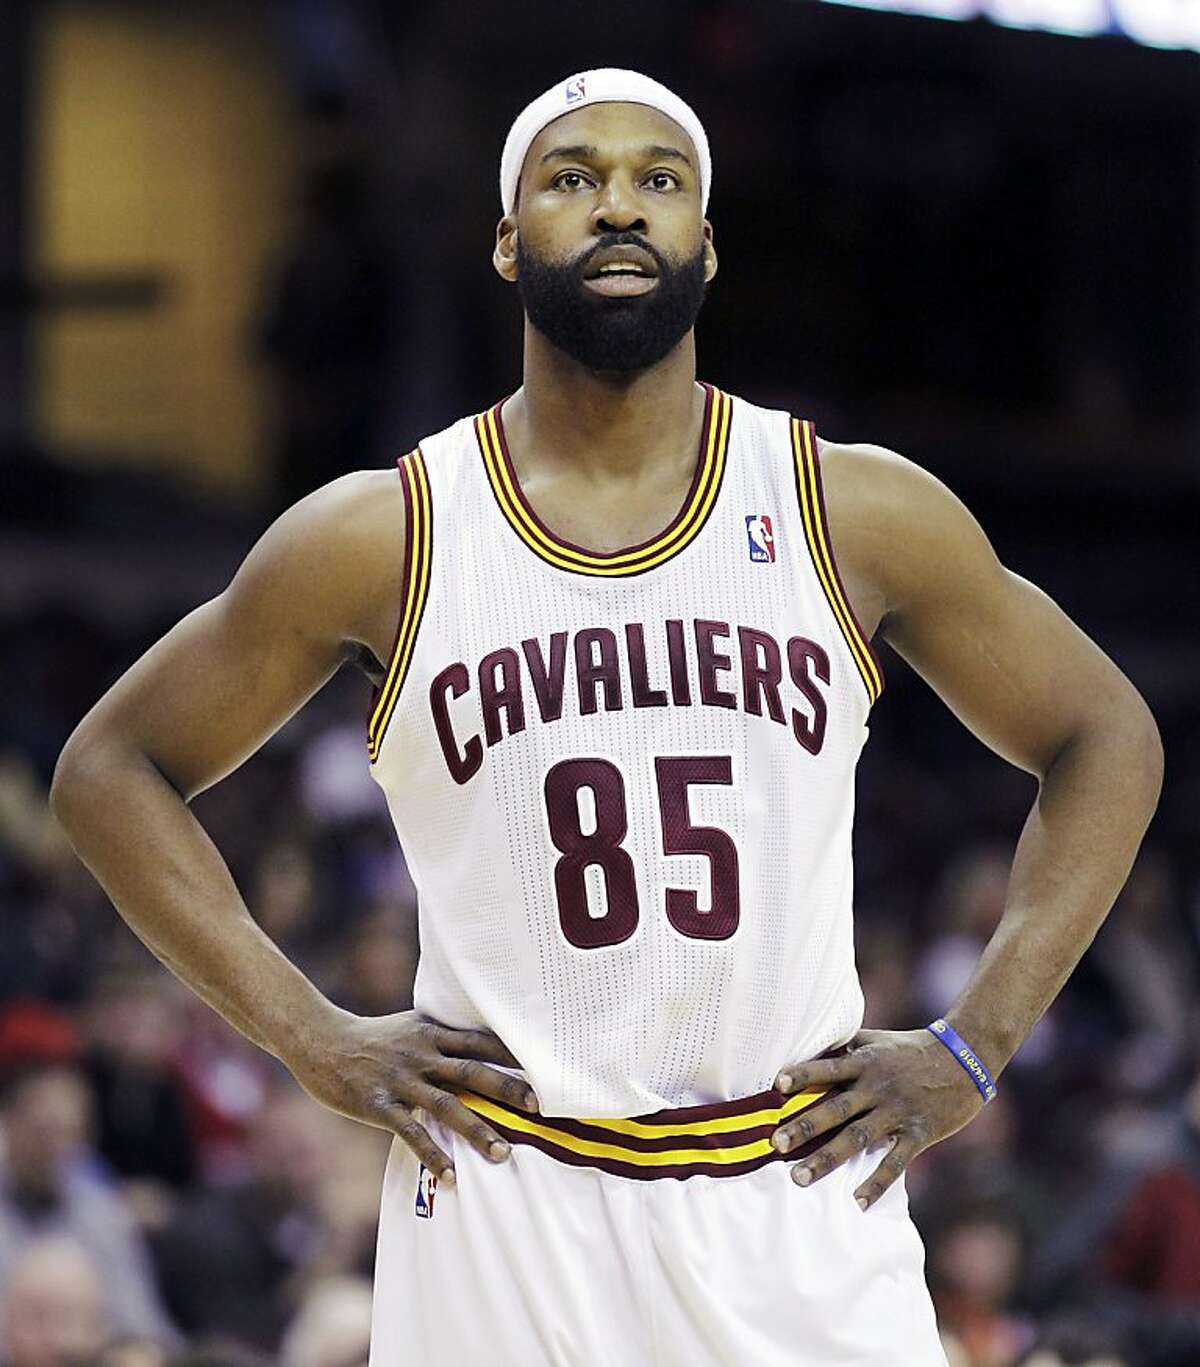 File - In this March 6, 2011, file photo, Cleveland Cavaliers guard Baron Davis looks on during an NBA basketball game against the New Orleans Hornets in Cleveland. The Cavaliers waived Davis using the NBA's new amnesty clause, Wednesday, Dec. 14, 2011, in a move that knocks the $28 million he is owed over the next two seasons off the salary cap. The Cavaliers will have to pay Davis, but they'll have more flexibility going forward as they try to improve a team that won just 19 games last season. (AP Photo/Amy Sancetta, File)